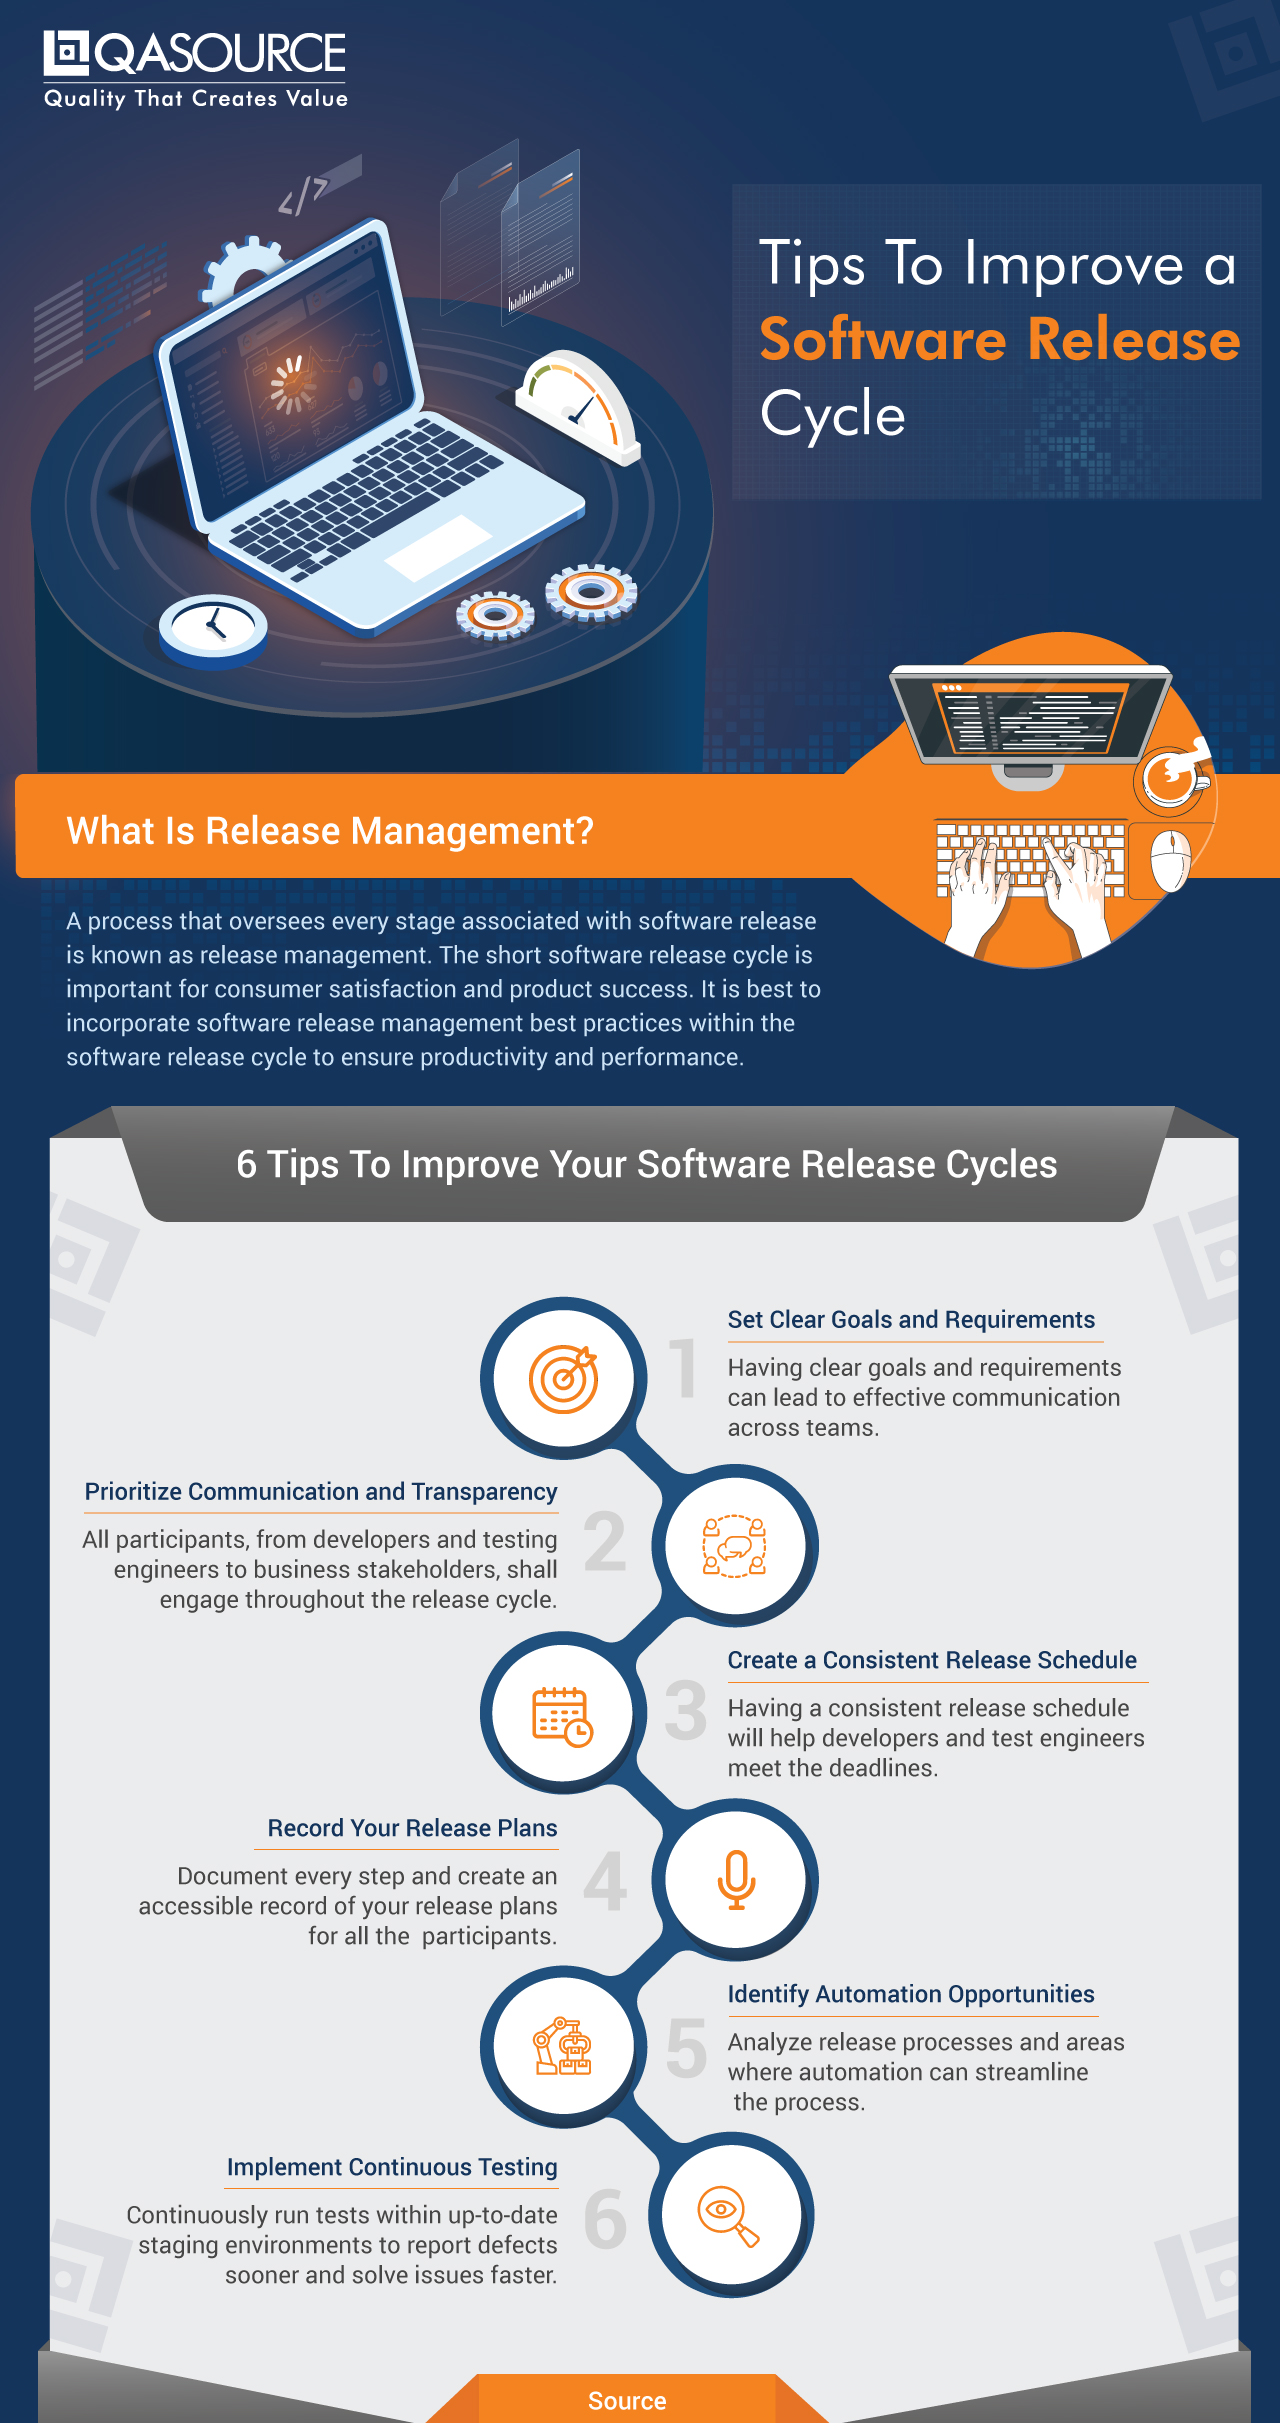 Tips To Improve a Software Release Cycle